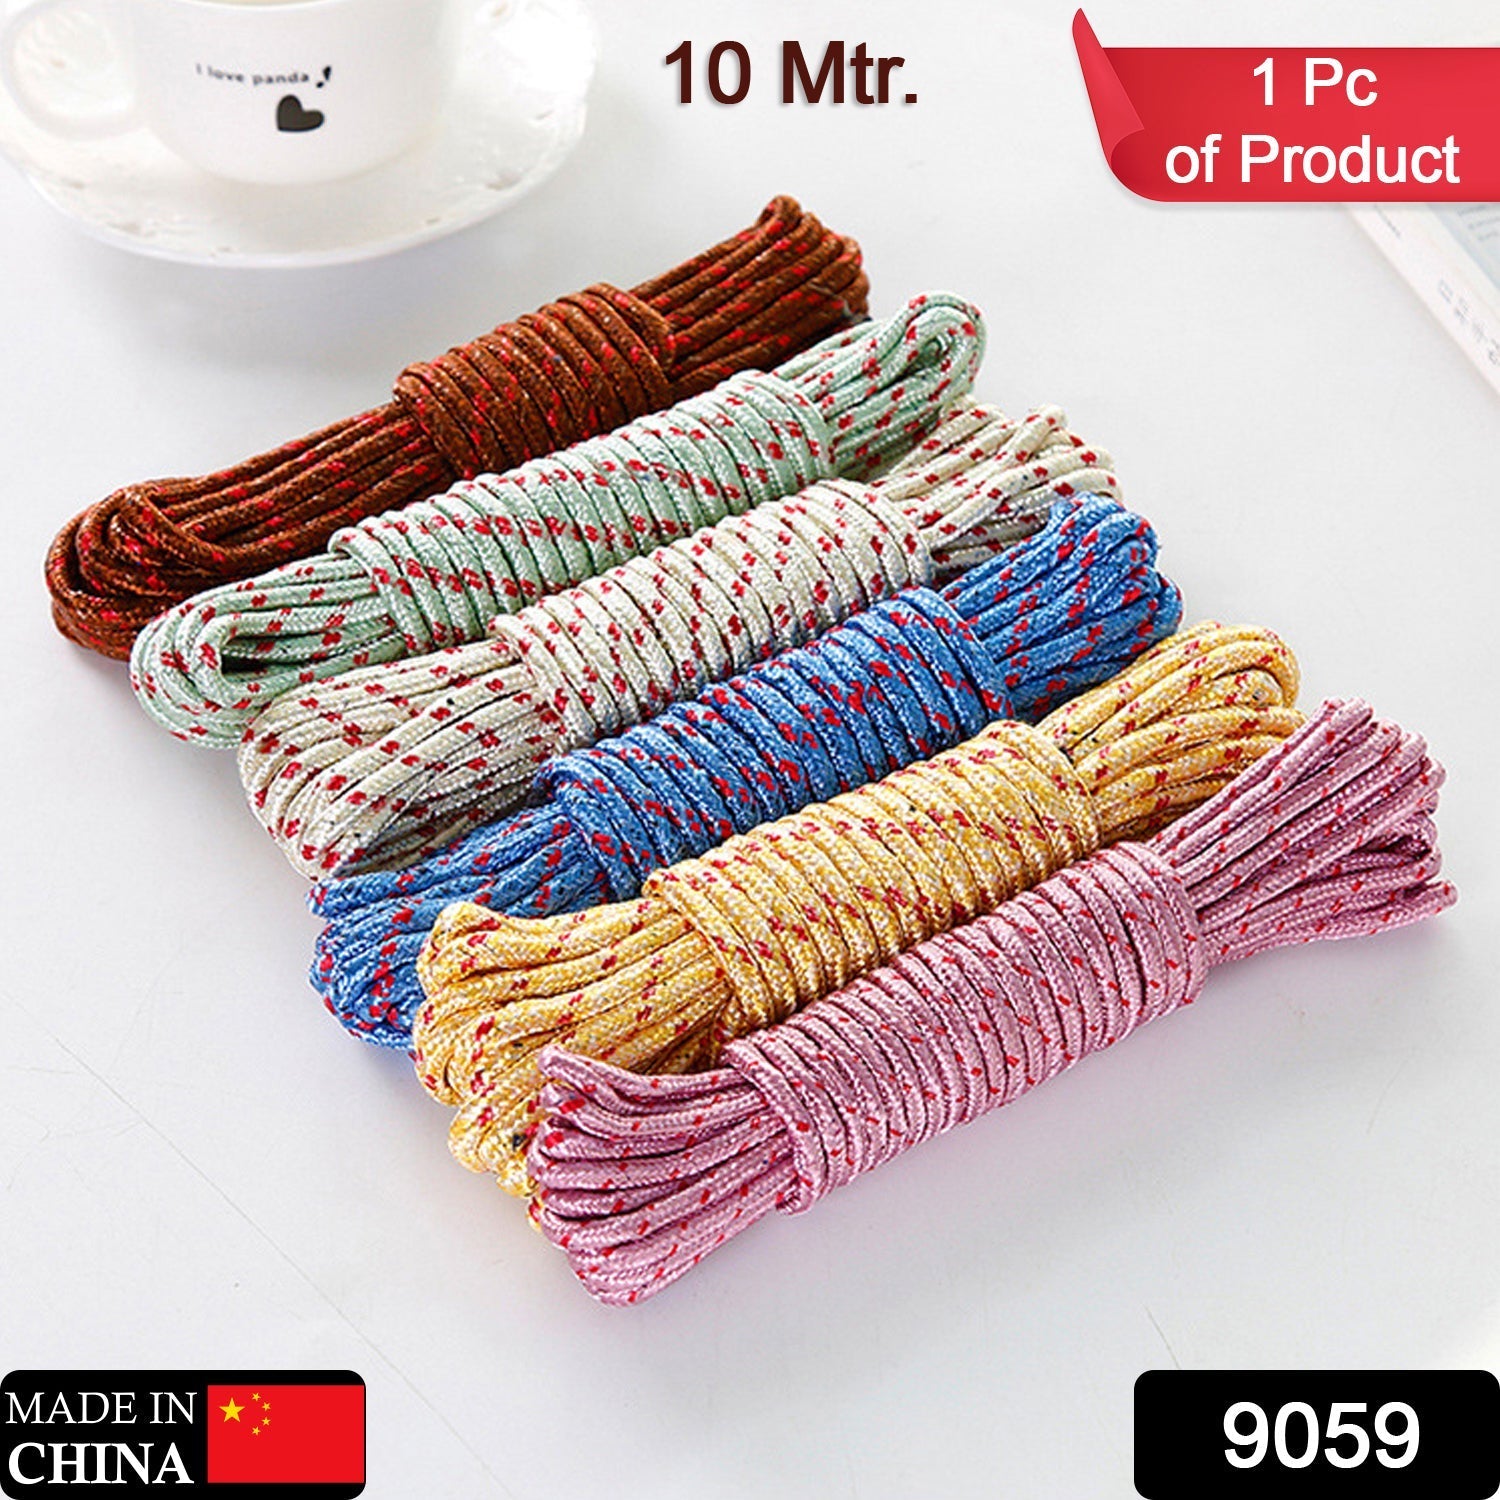 9059 10 Meter Heavy Duty Laundry Drying Clothesline Rope Portable Travel Nylon Cord Sturdy Clothes Line for Outdoor, Camping, Indoor, Crafting, Art Projects Dukandaily